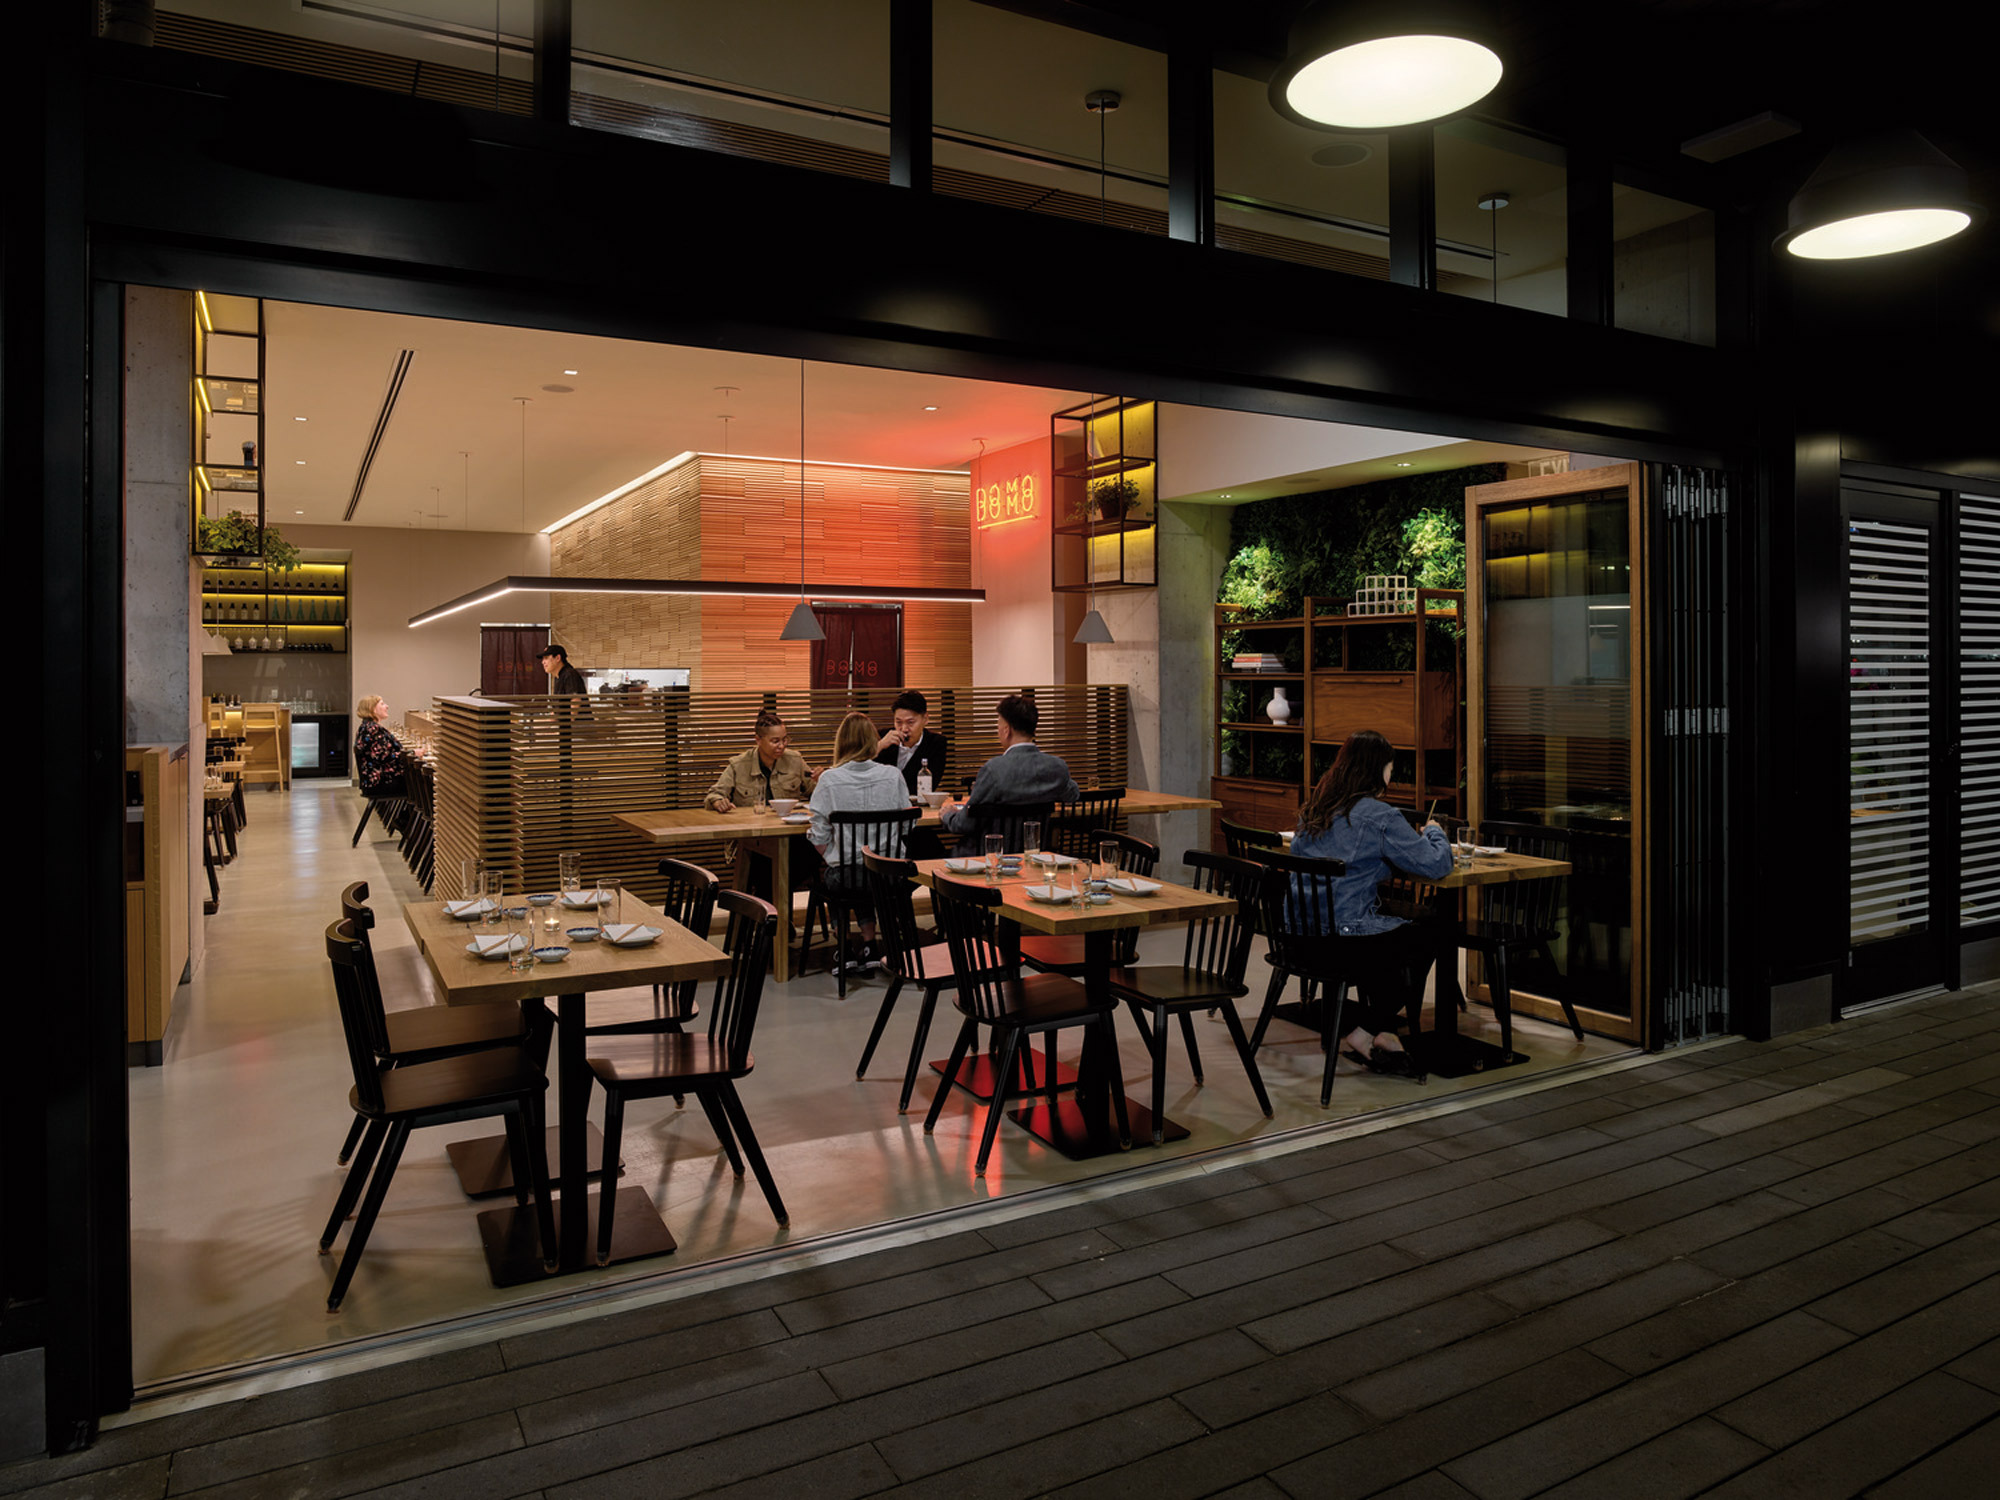 Modern restaurant interior with patrons dining, featuring sleek black framing, warm wood accents, ambient lighting, and a cohesive blend of natural and industrial design elements.